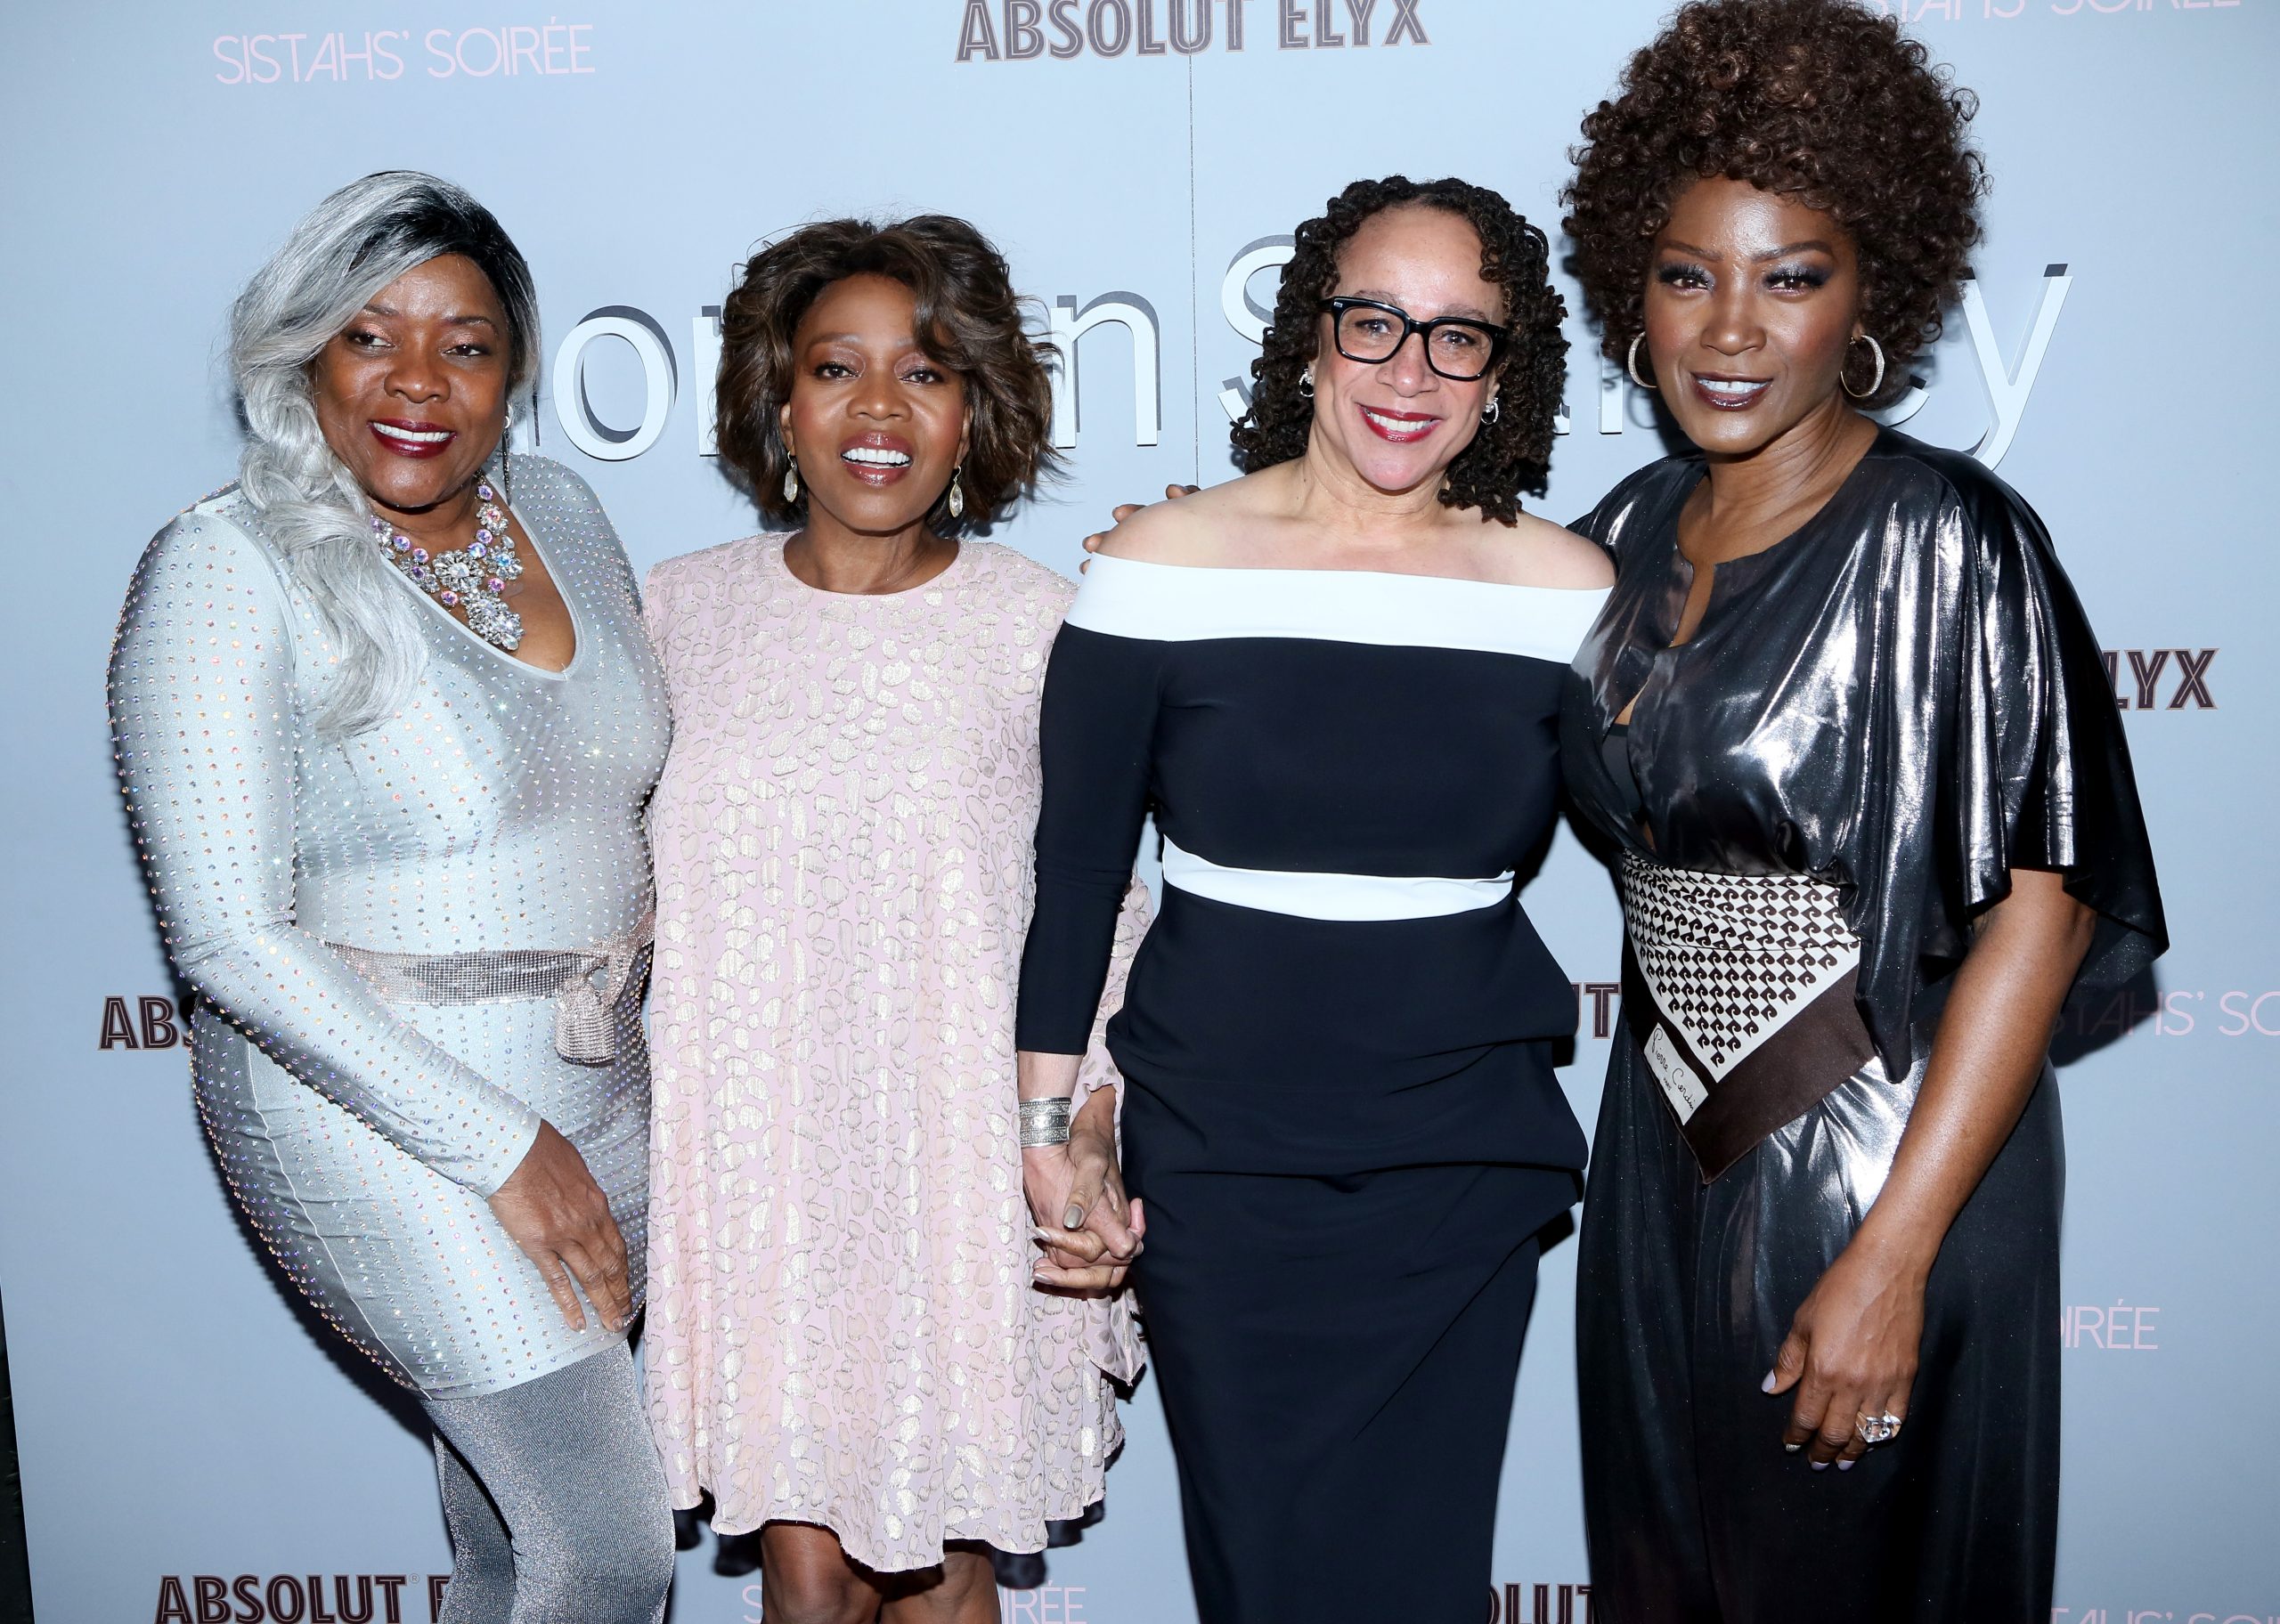 Alfre Woodard’s 11th Annual Sistahs’ Soirée at The Private Residence of Jonas Tahlin, CEO of Absolut Elyx